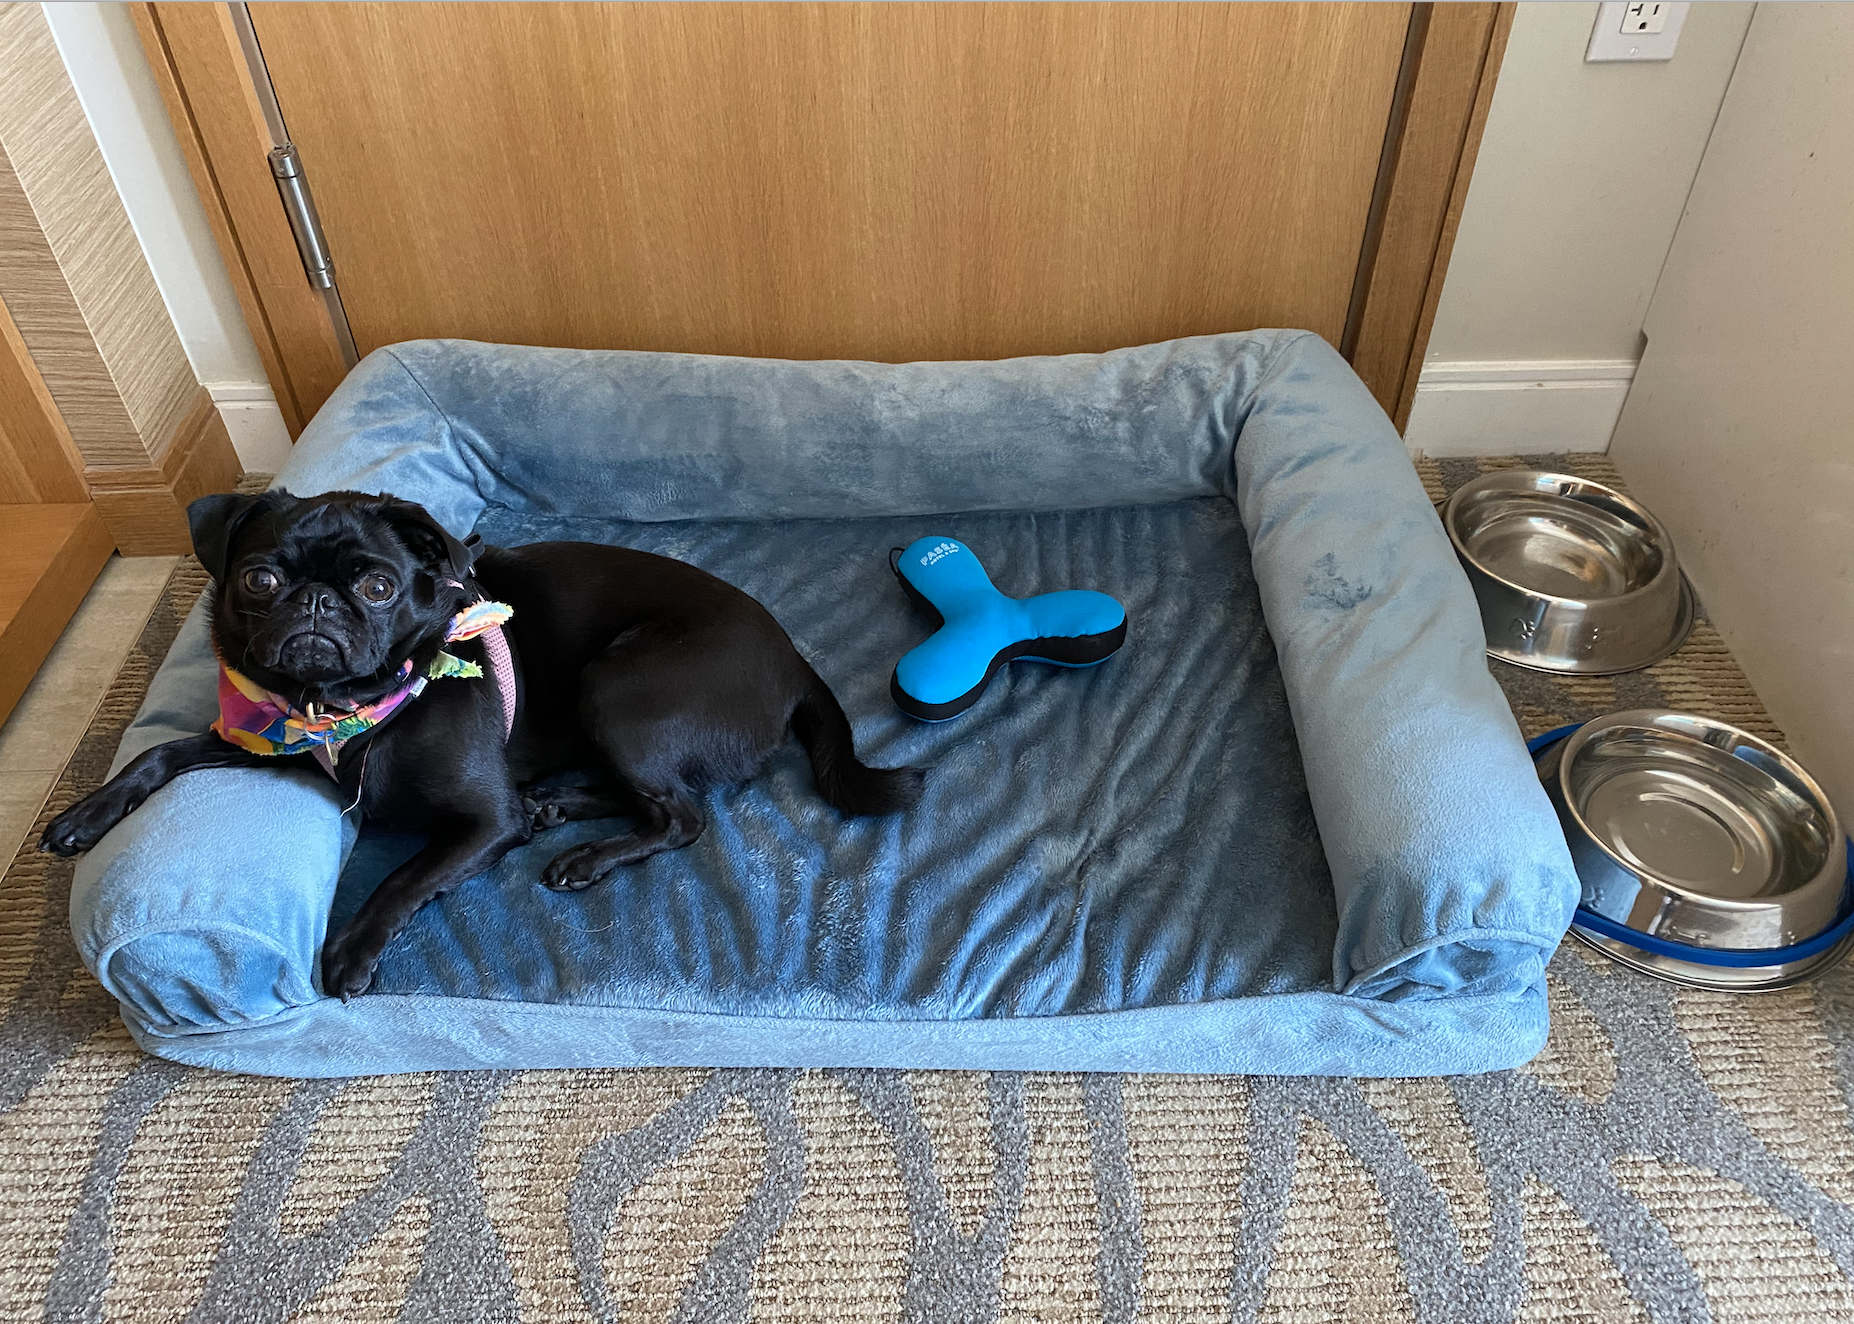 Phoebe lying in her dog bed, provided by the hotel